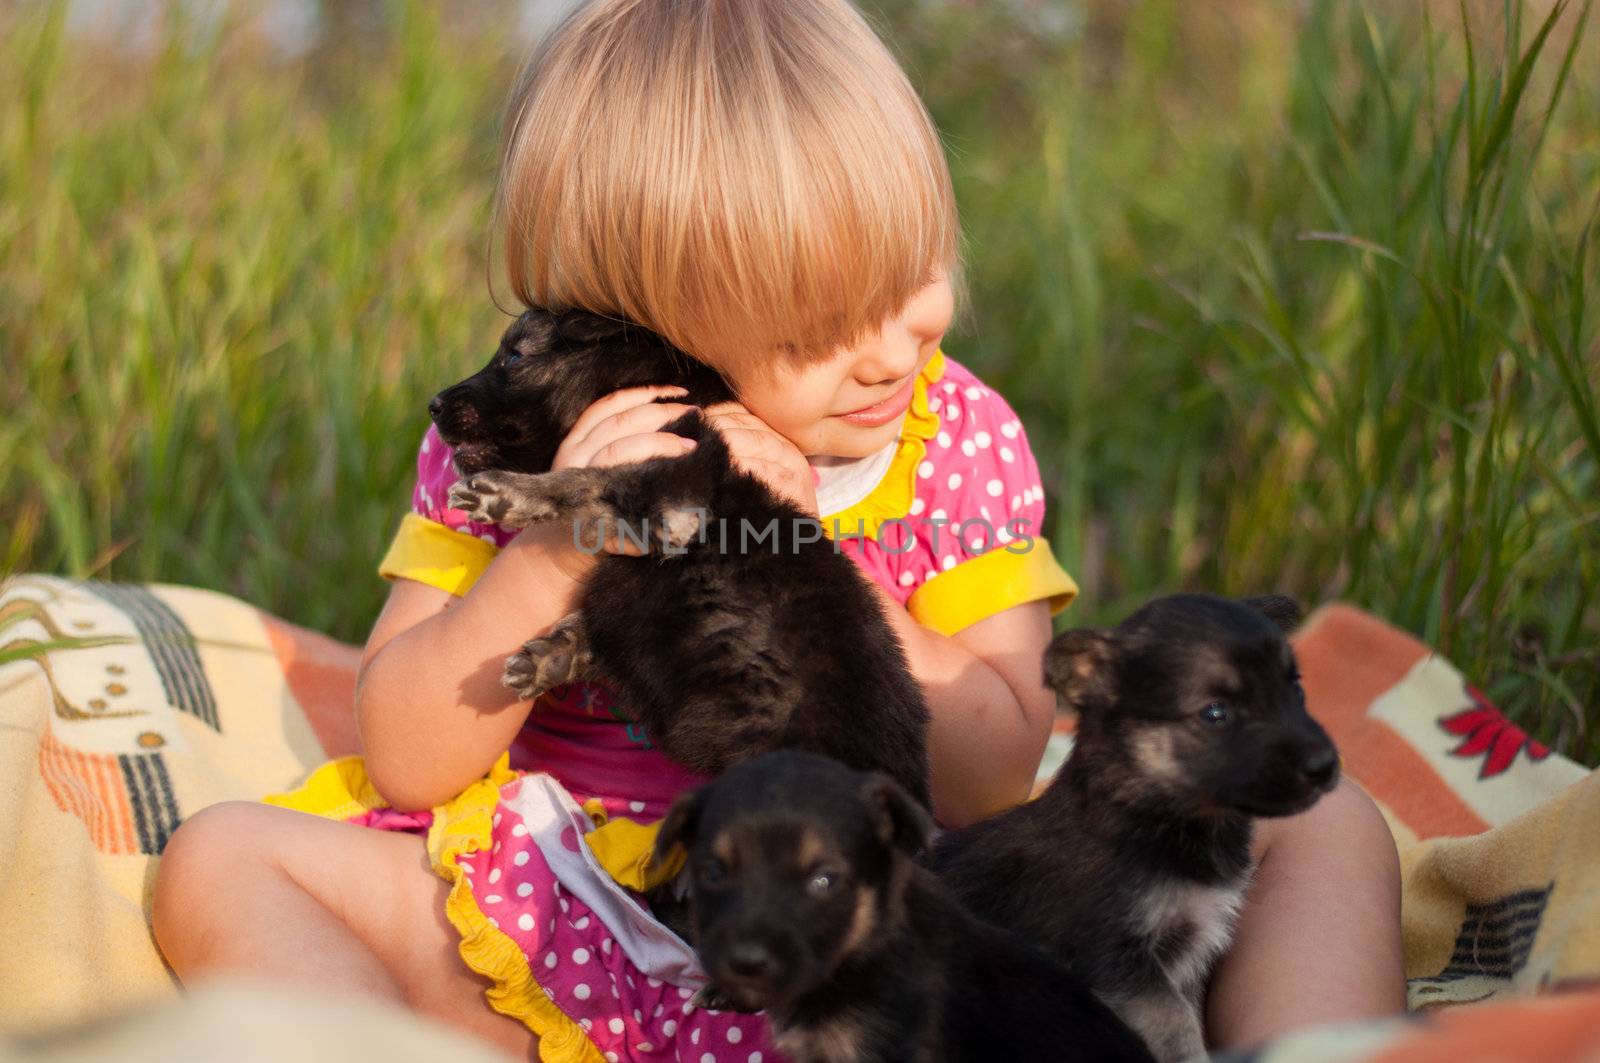 Little girl playing with puppies